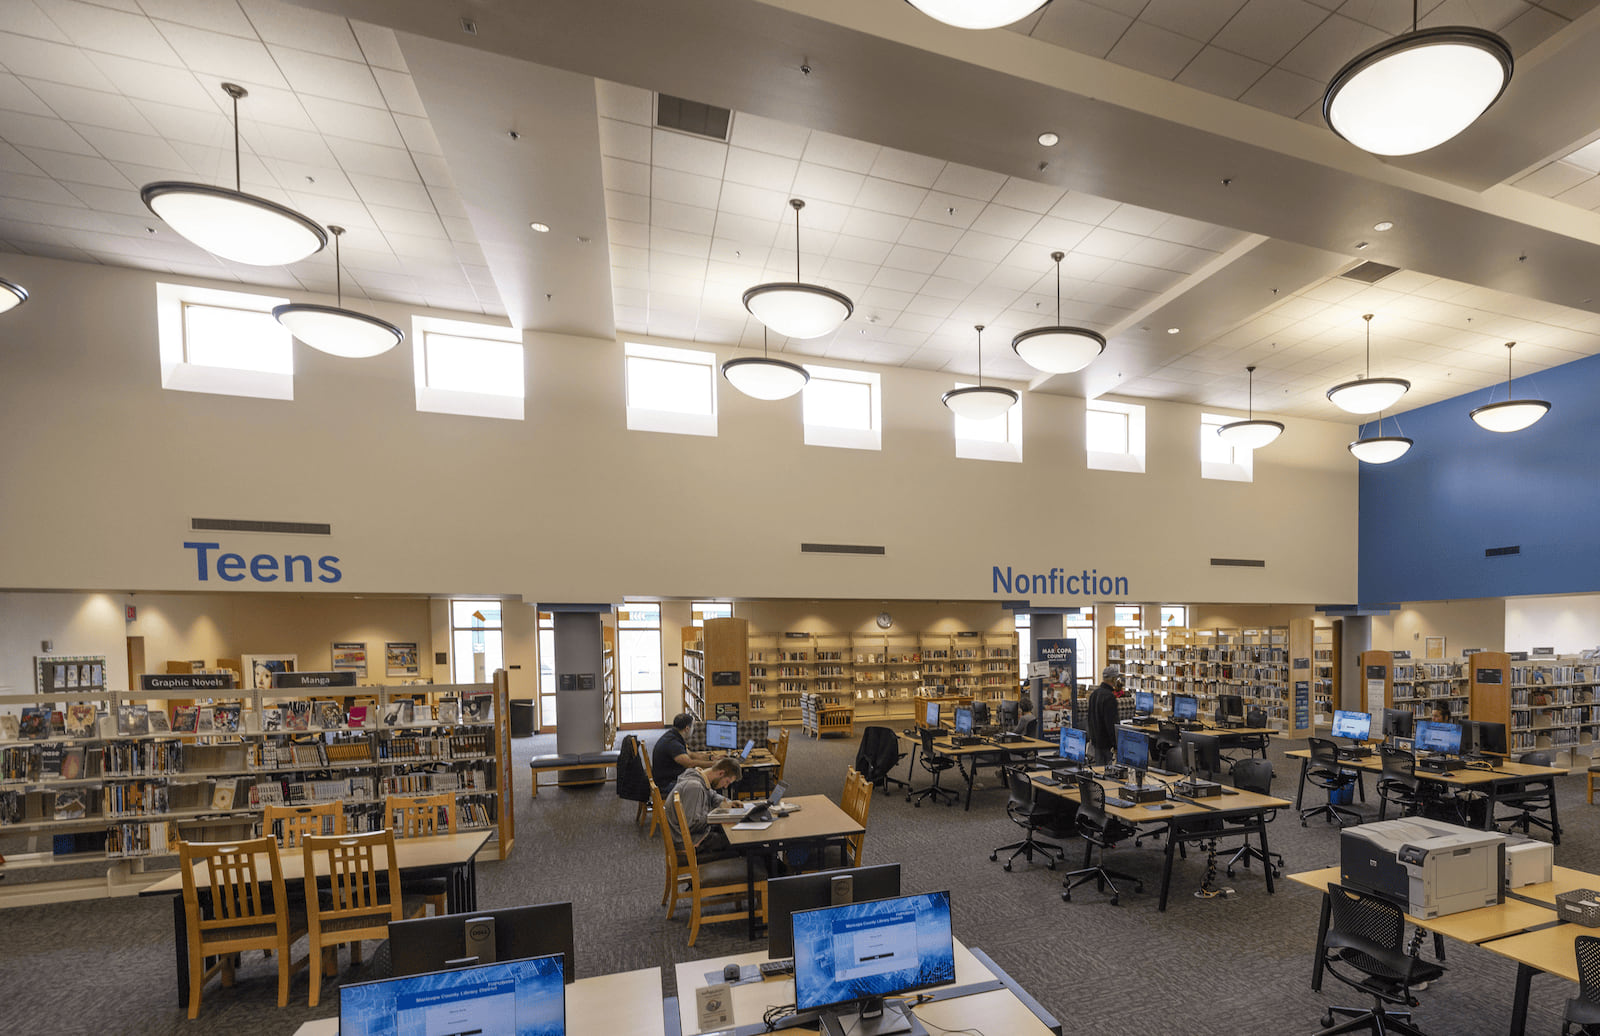 Photo of the computer area, tables, the teens section and Nonfiction section